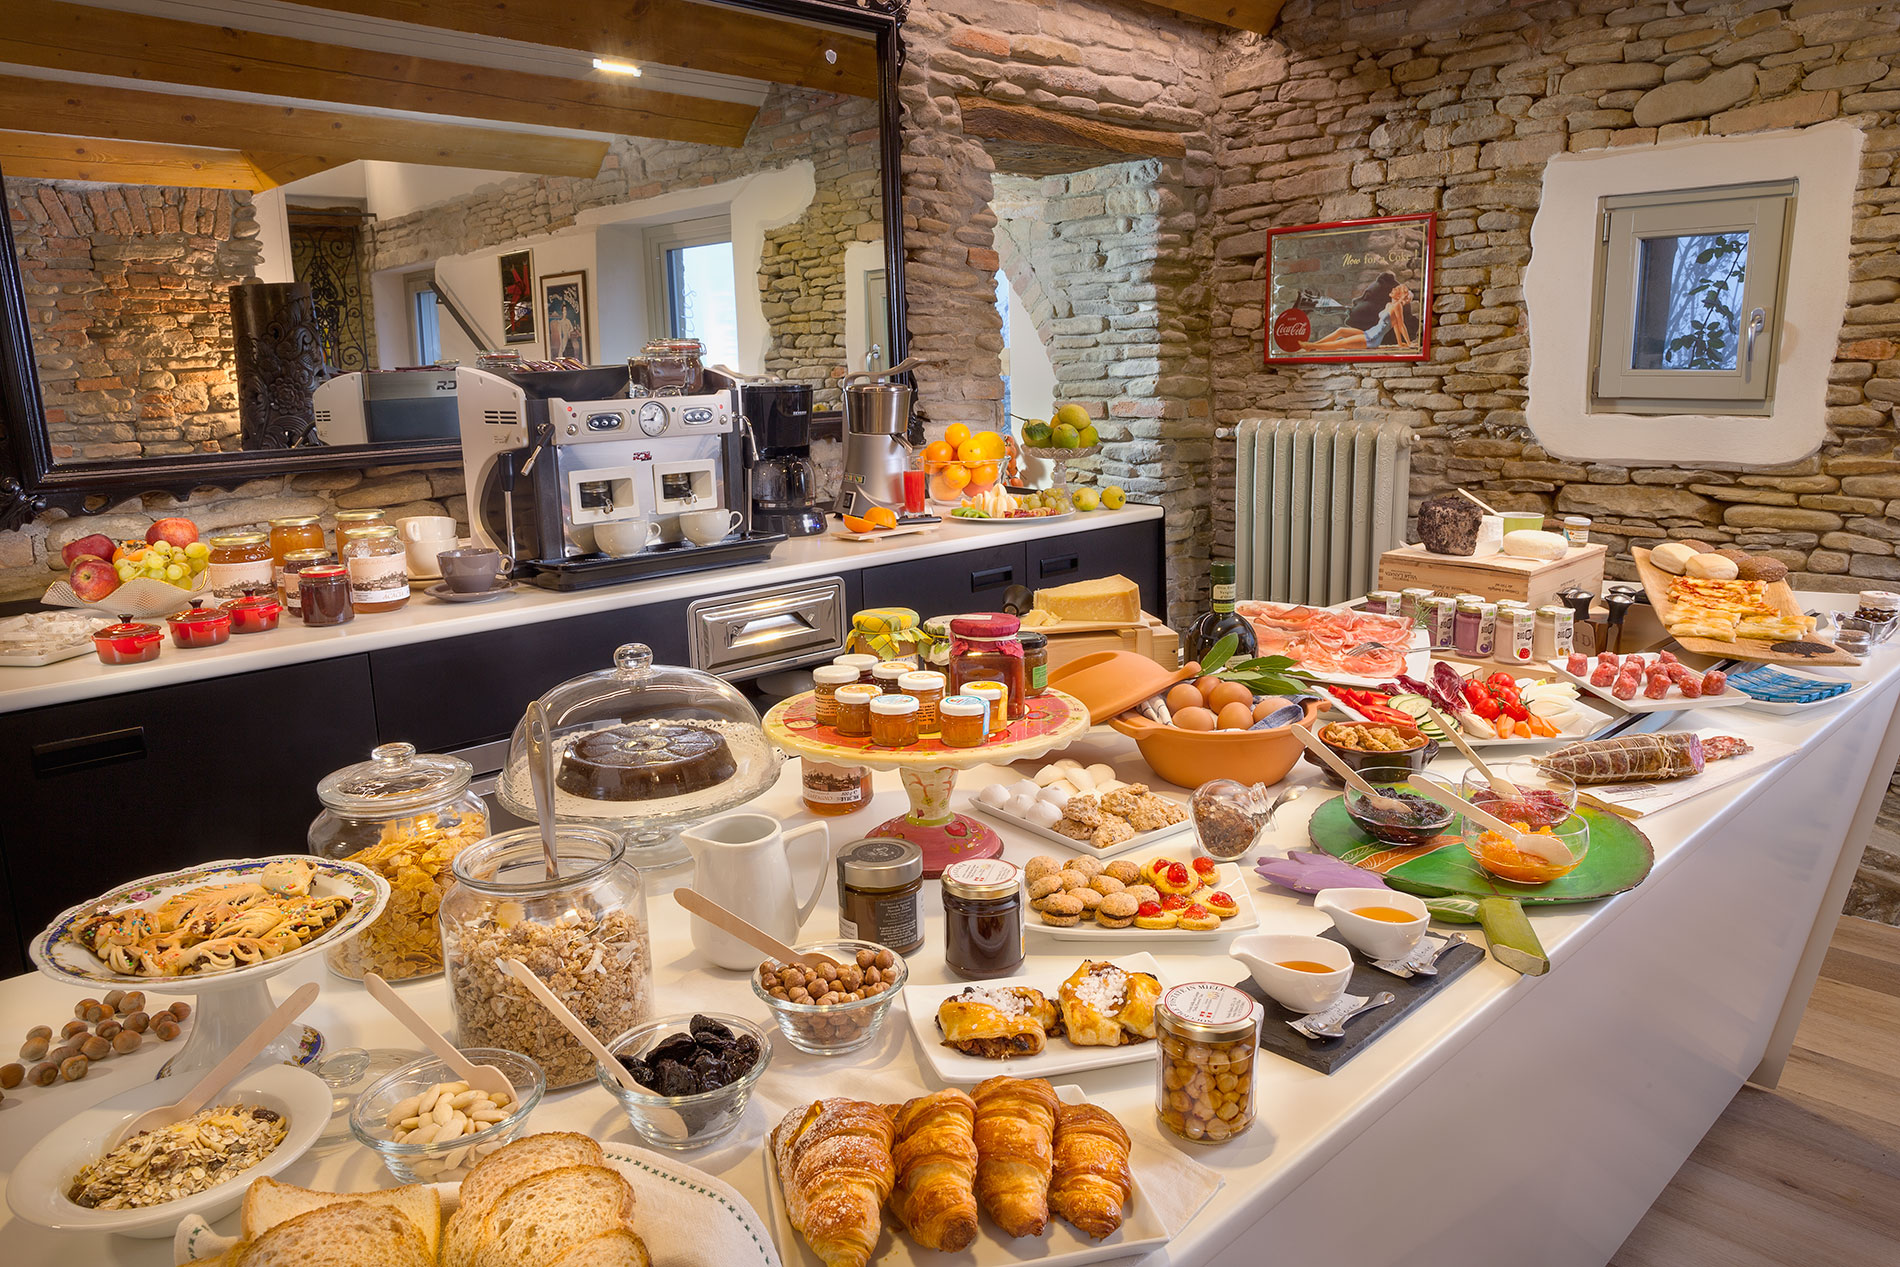 One section of the breakfast buffet that greets visitors in the morning.